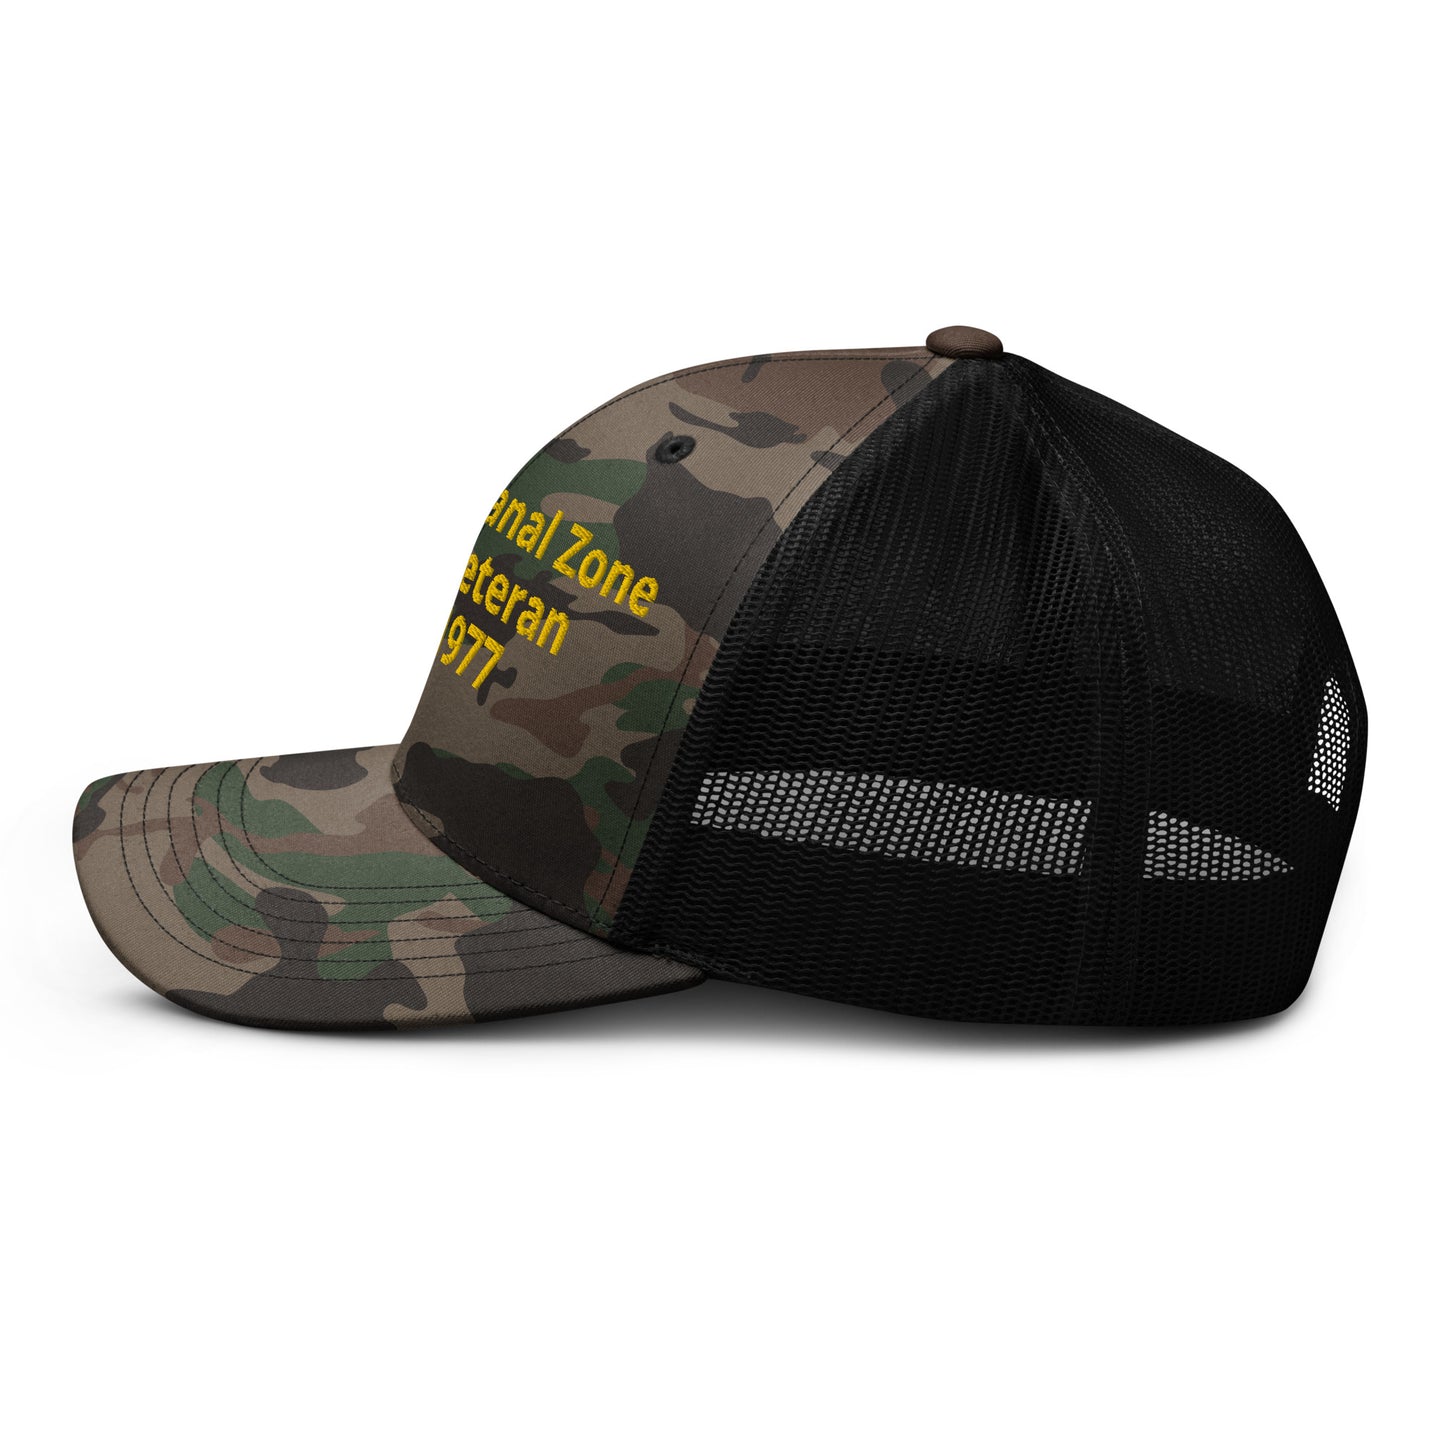 Personalize your Camouflage trucker hat